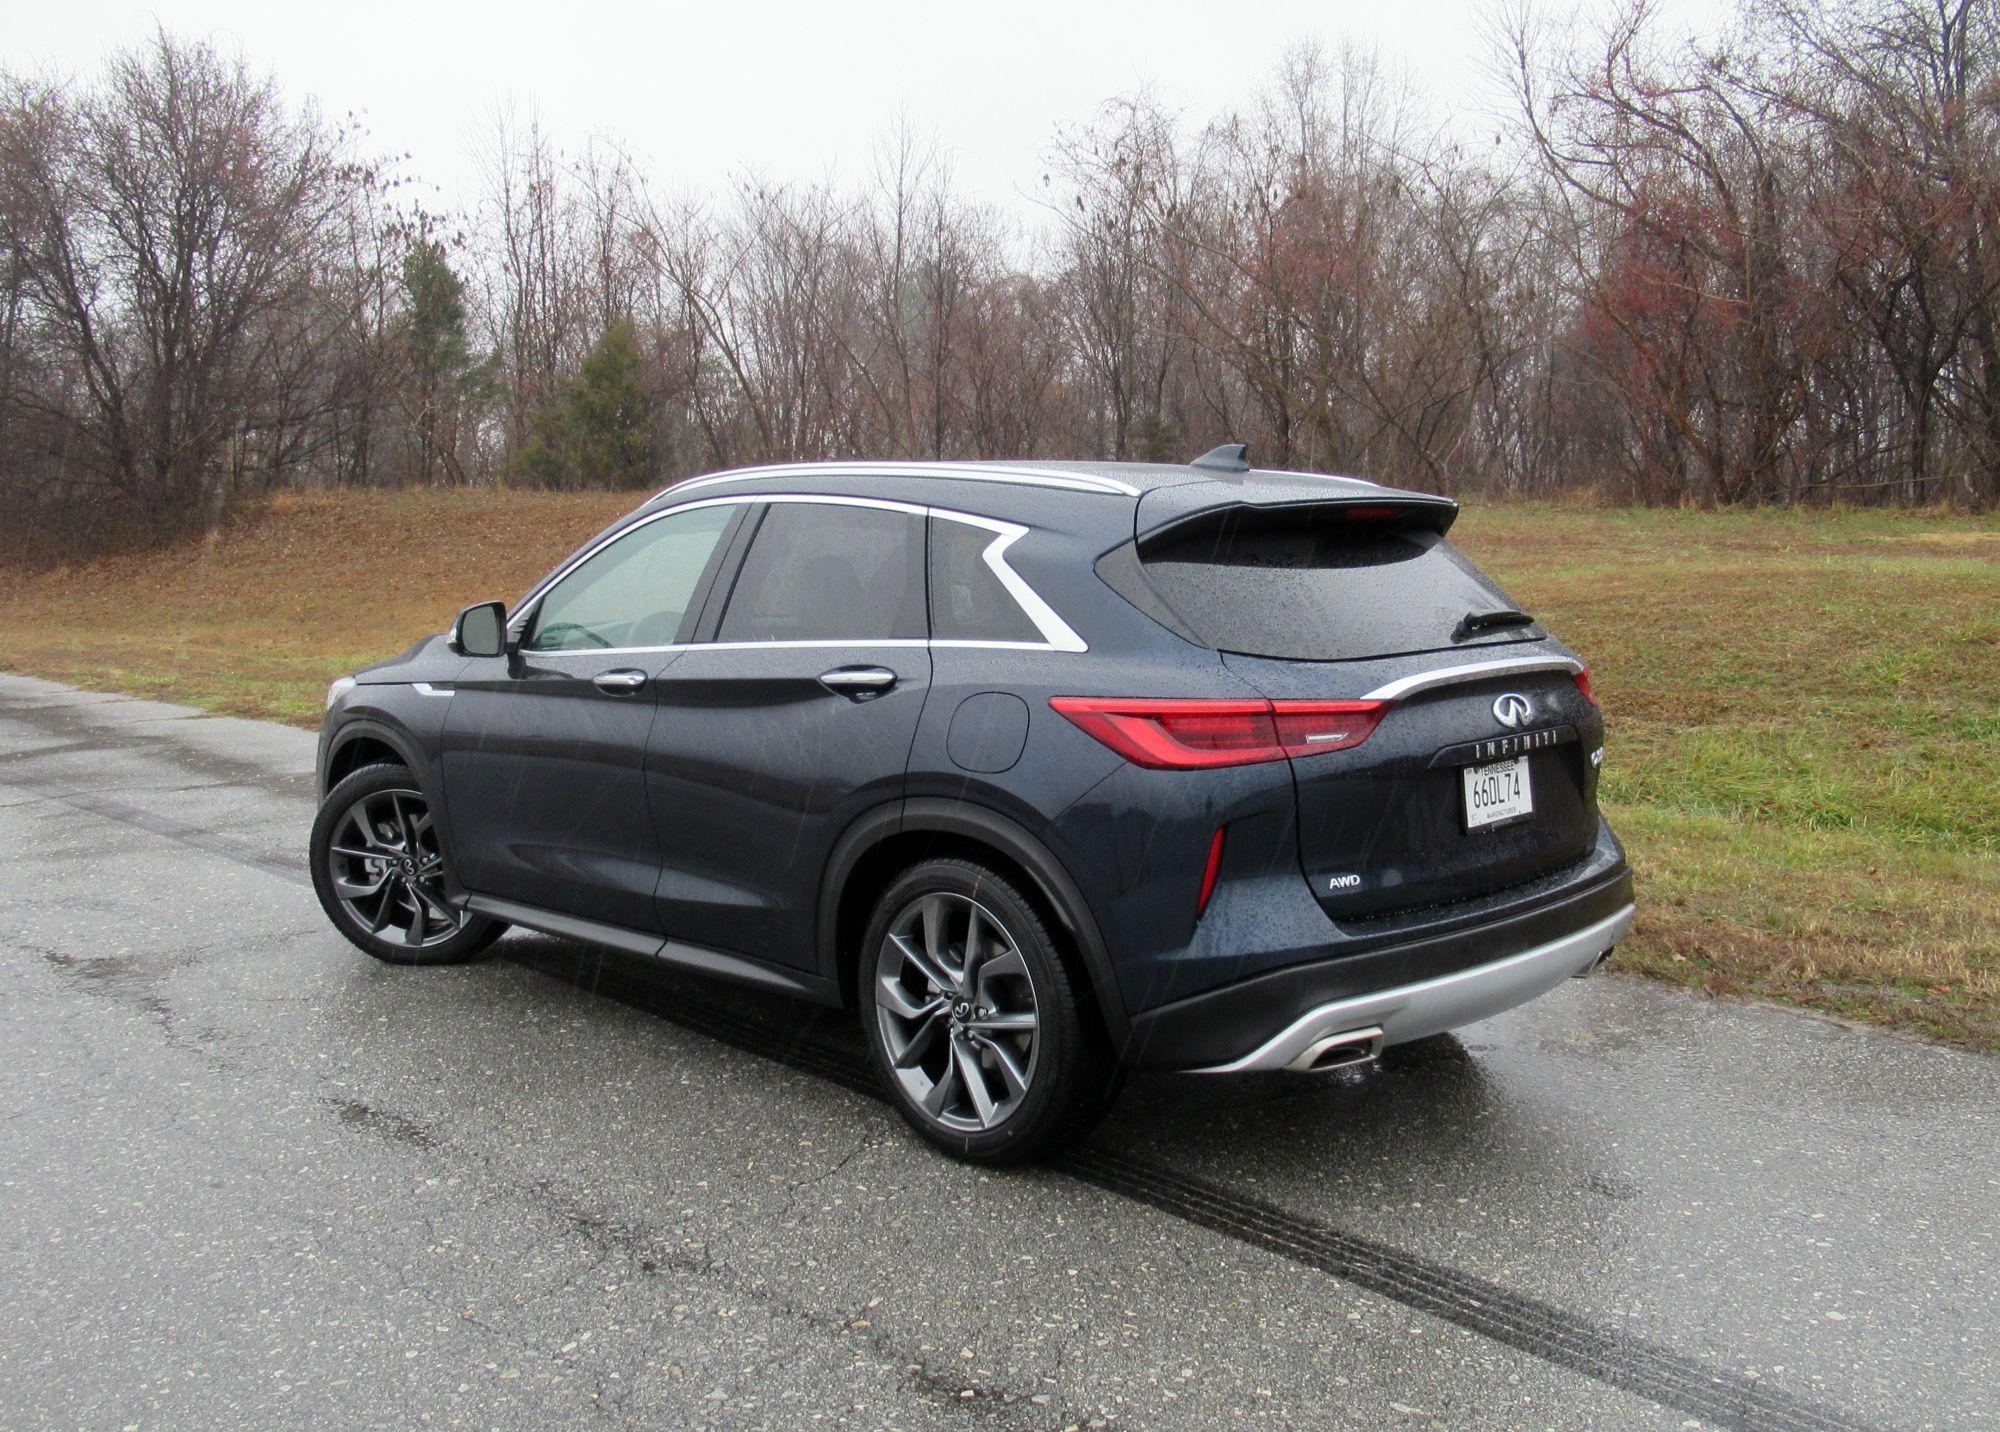 2020 Infiniti QX50 Impressions - What's Changed from 2019?